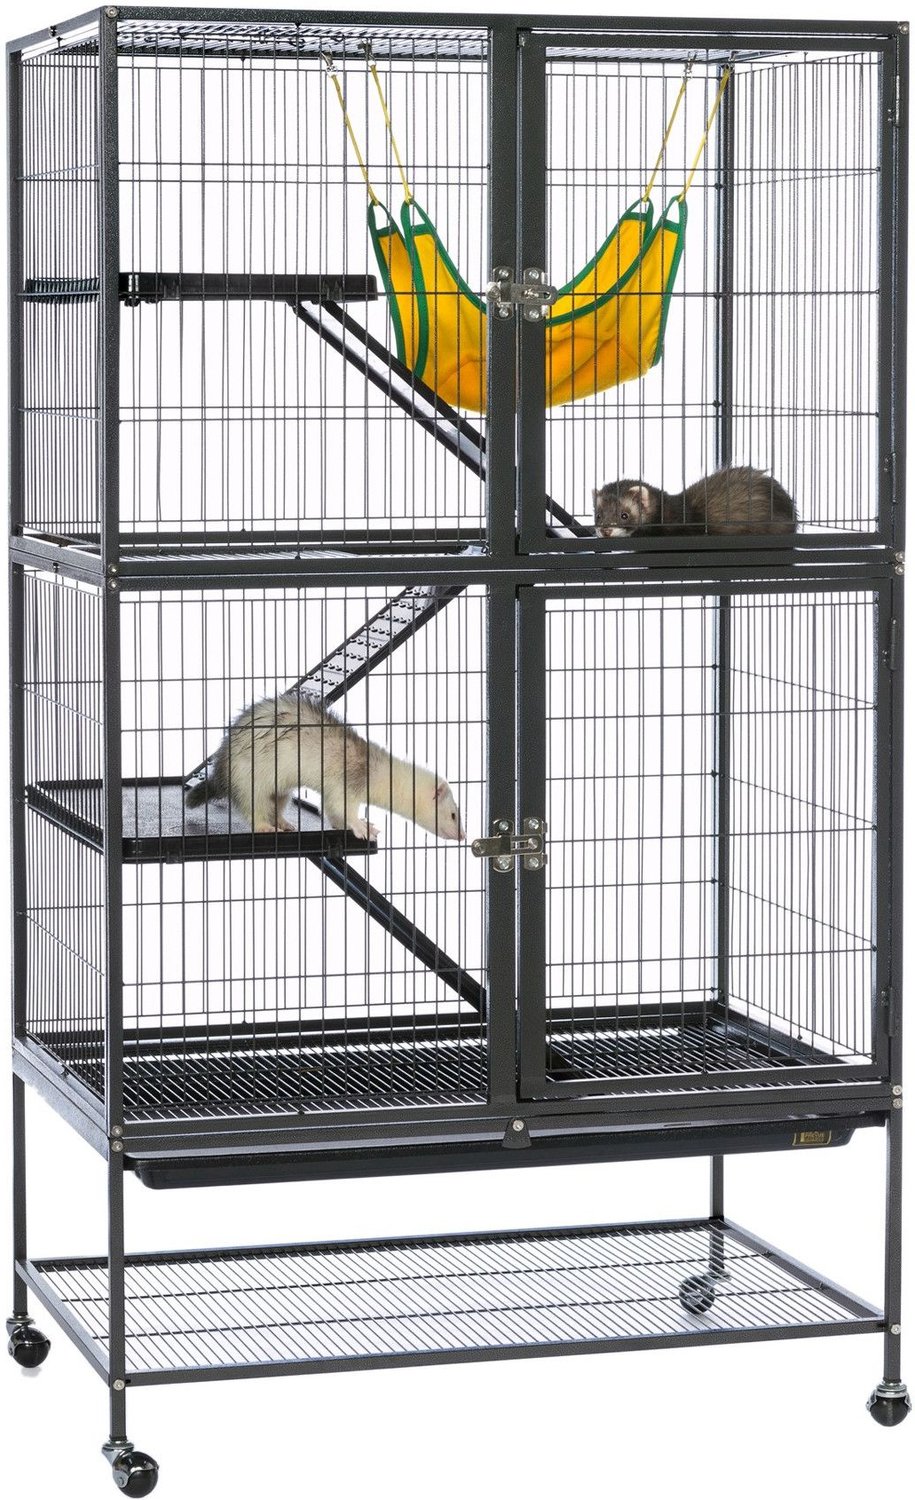 Get e-book Feisty ferret cage For Free